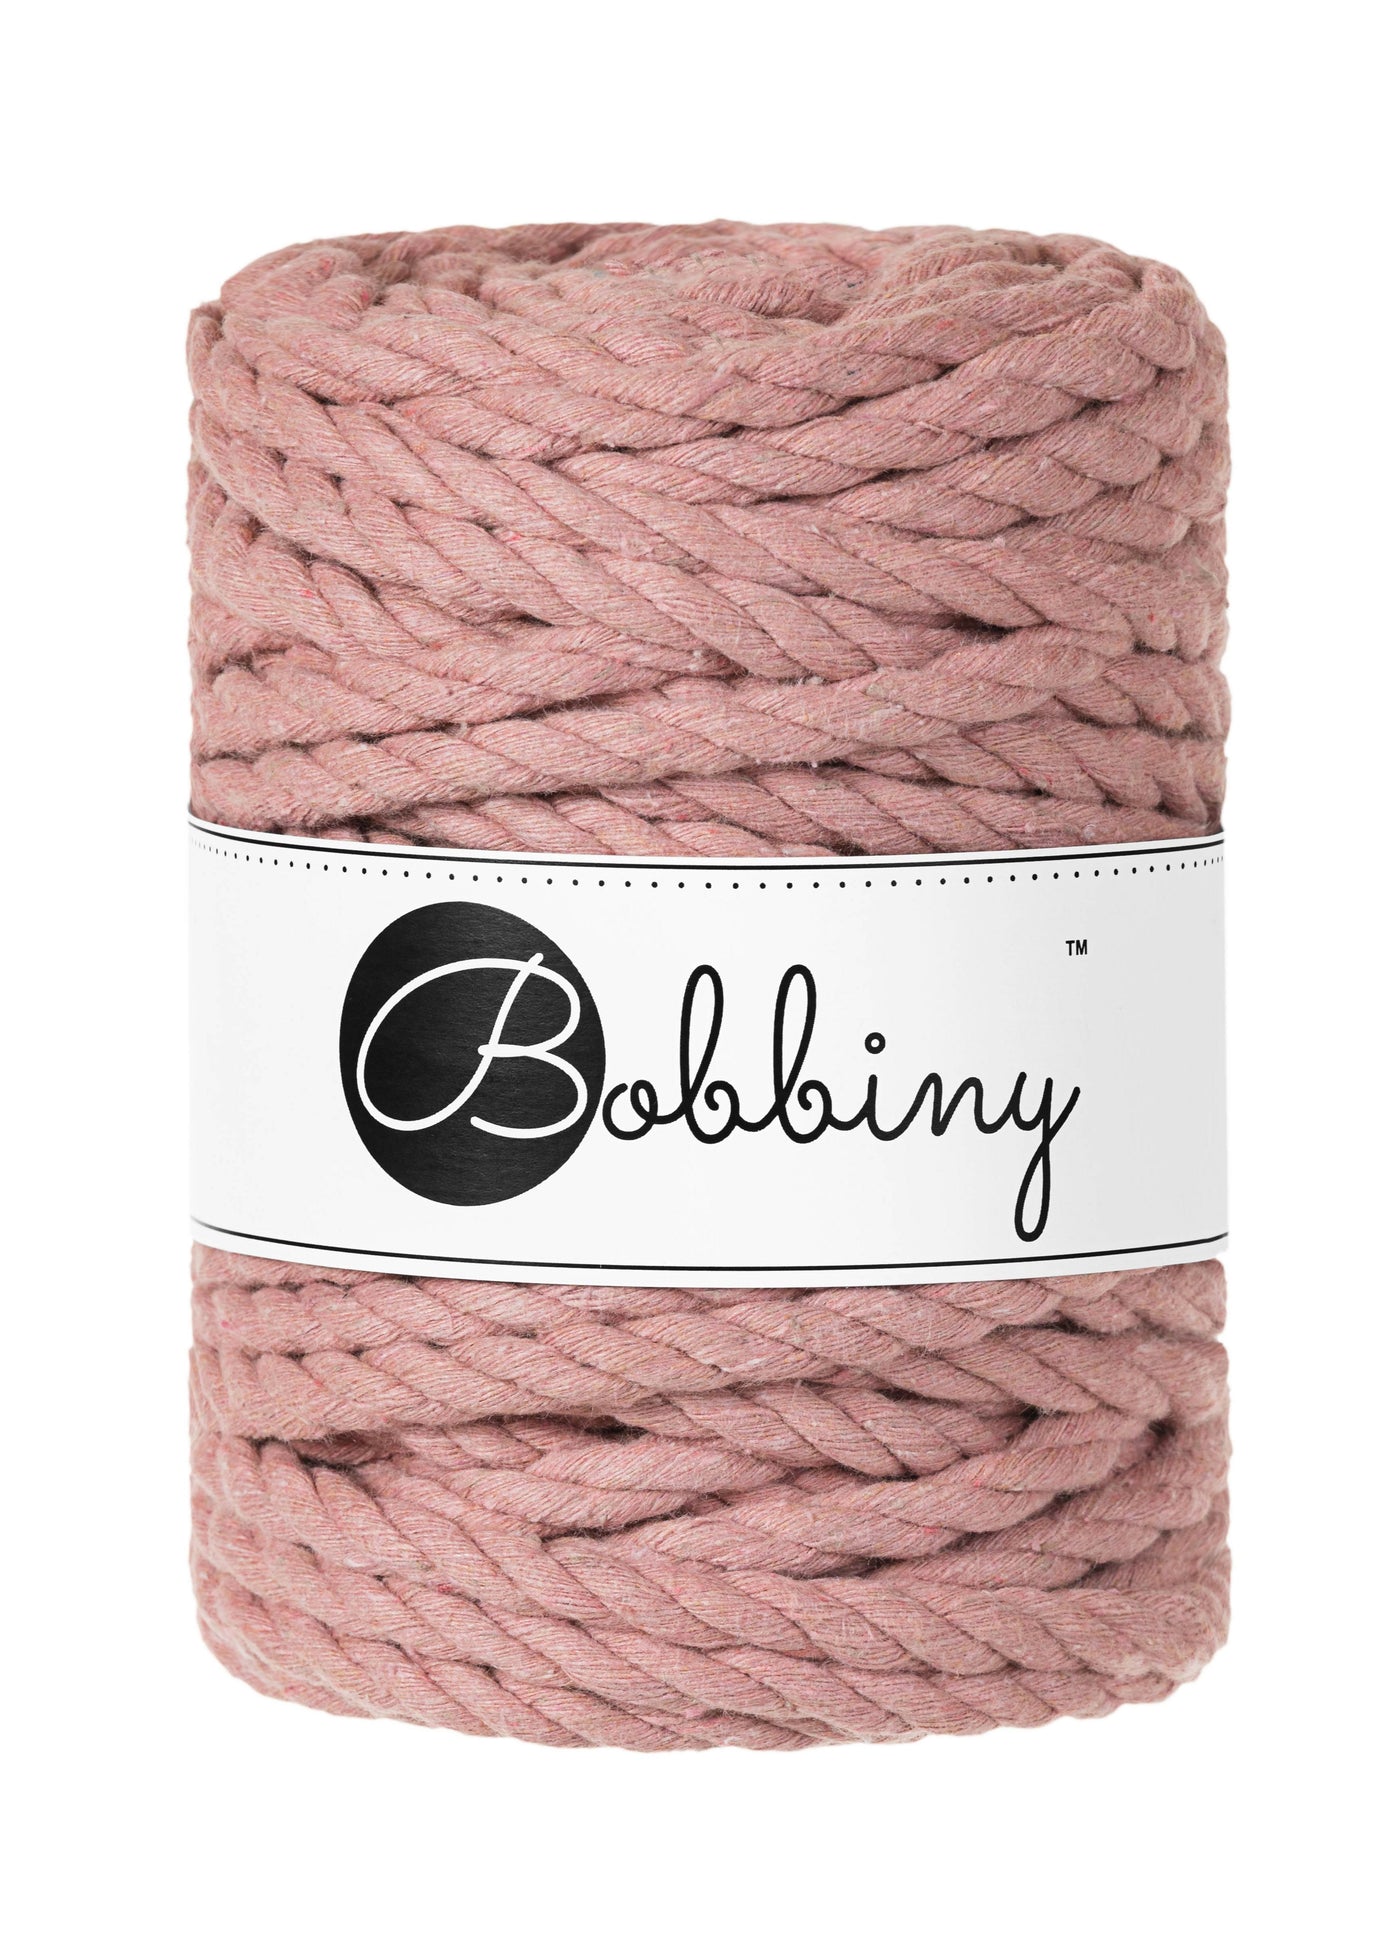 This superb product from Bobbiny is an amazing addition to their gorgeous range of products.  Shown here in the ever popular 'Blush' shade   Made from 100% recycled cotton, it is perfect for Macrame projects due to its sturdiness. They are non-toxic, certified safe for children and meet certified worldwide textile standards.  This super soft triple twist rope also makes the most spectacular fringes and tassels.  Length: 30m/32 yards